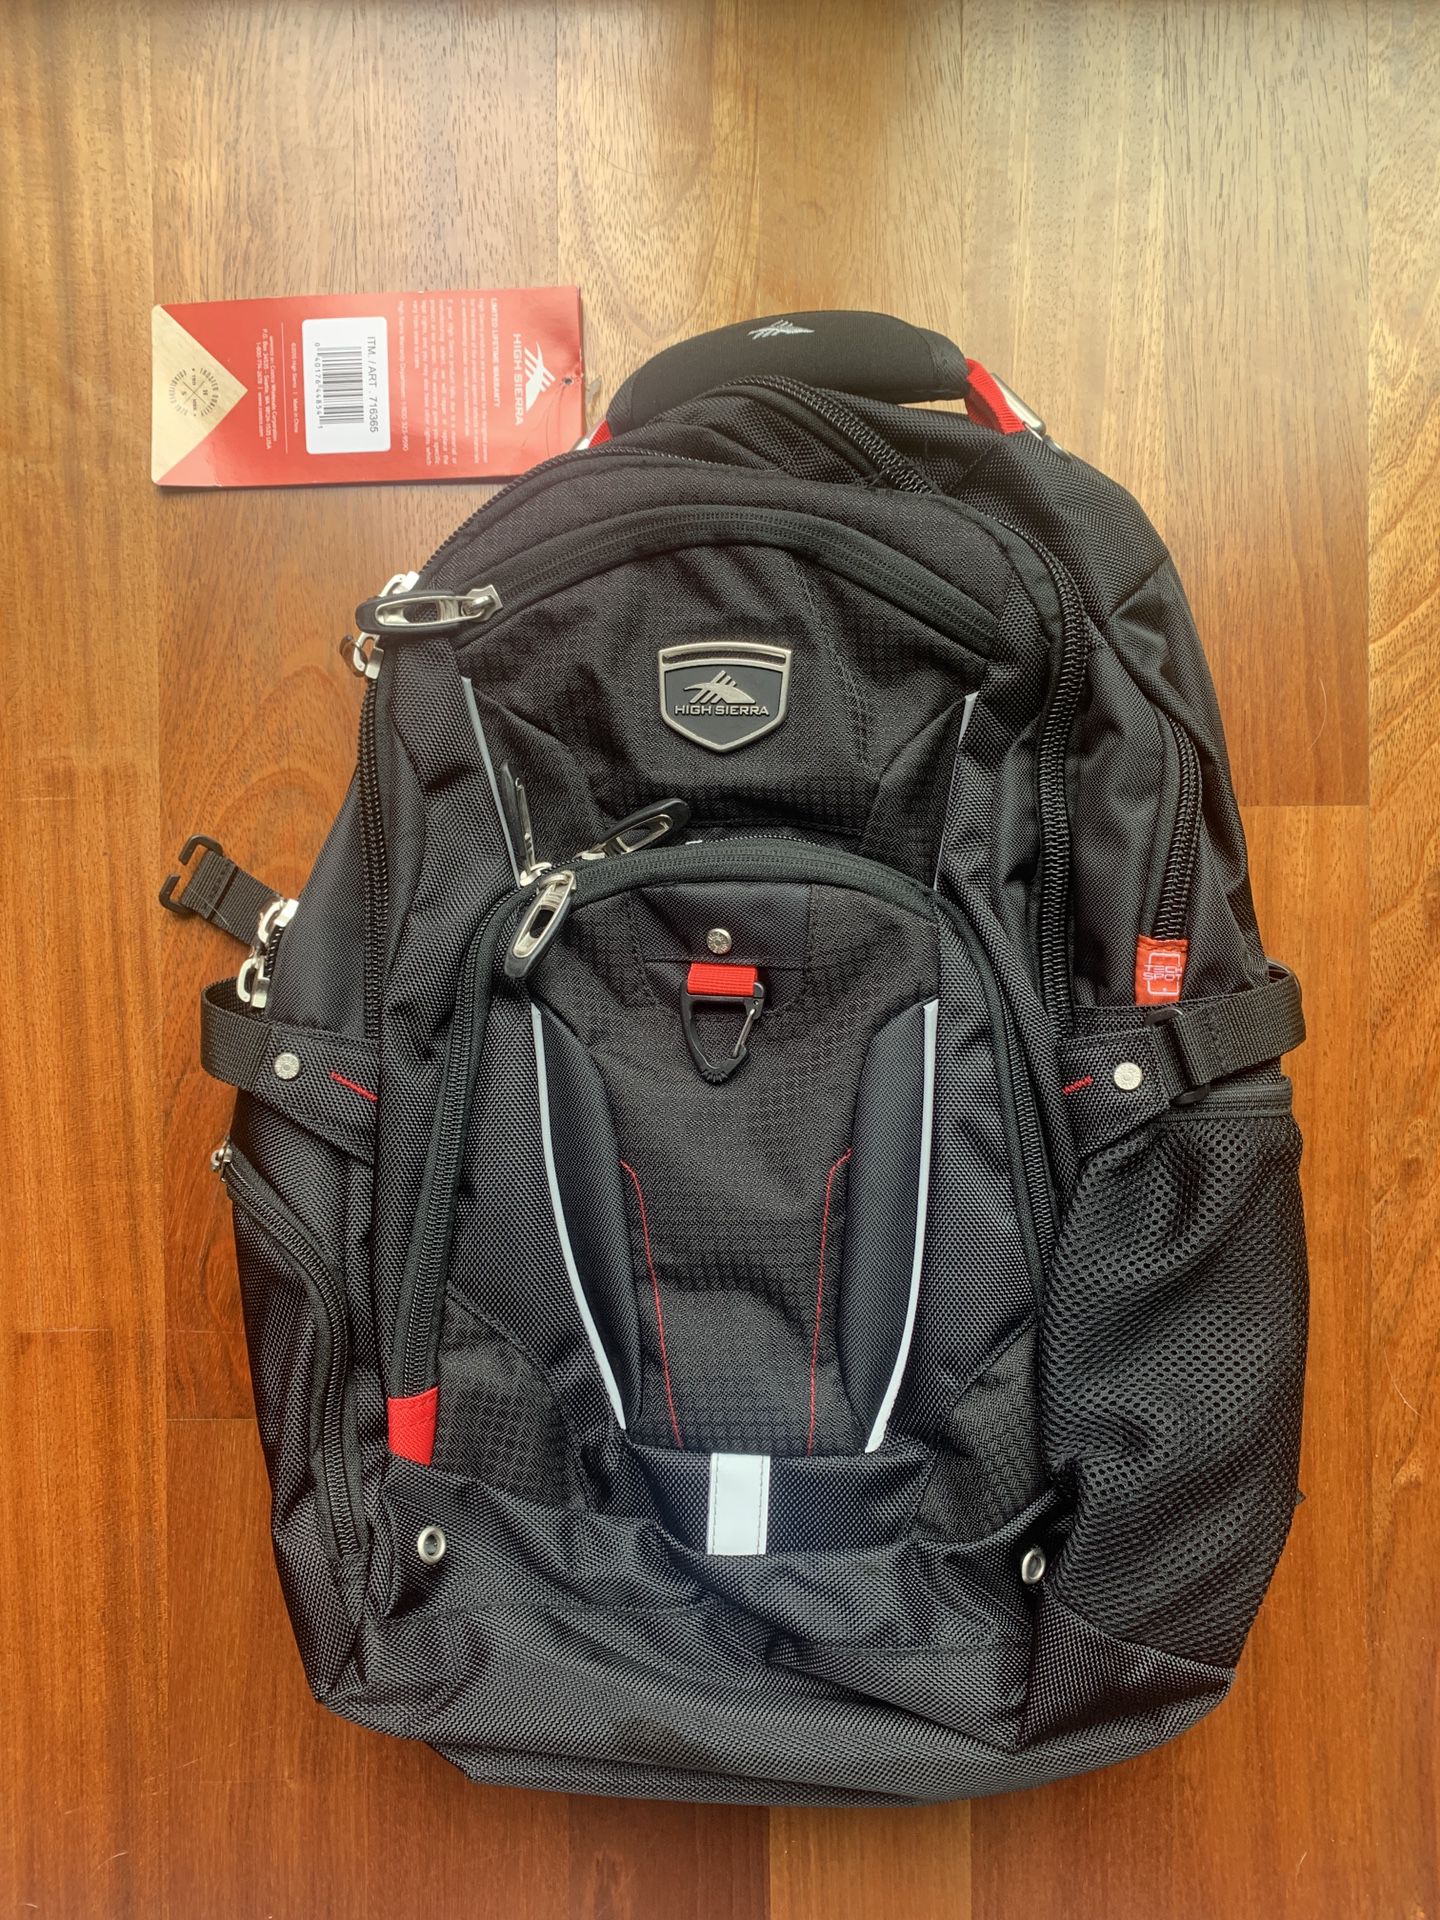 High Sierra Elite Backpack (17” Laptop, 43L, New With Tags)